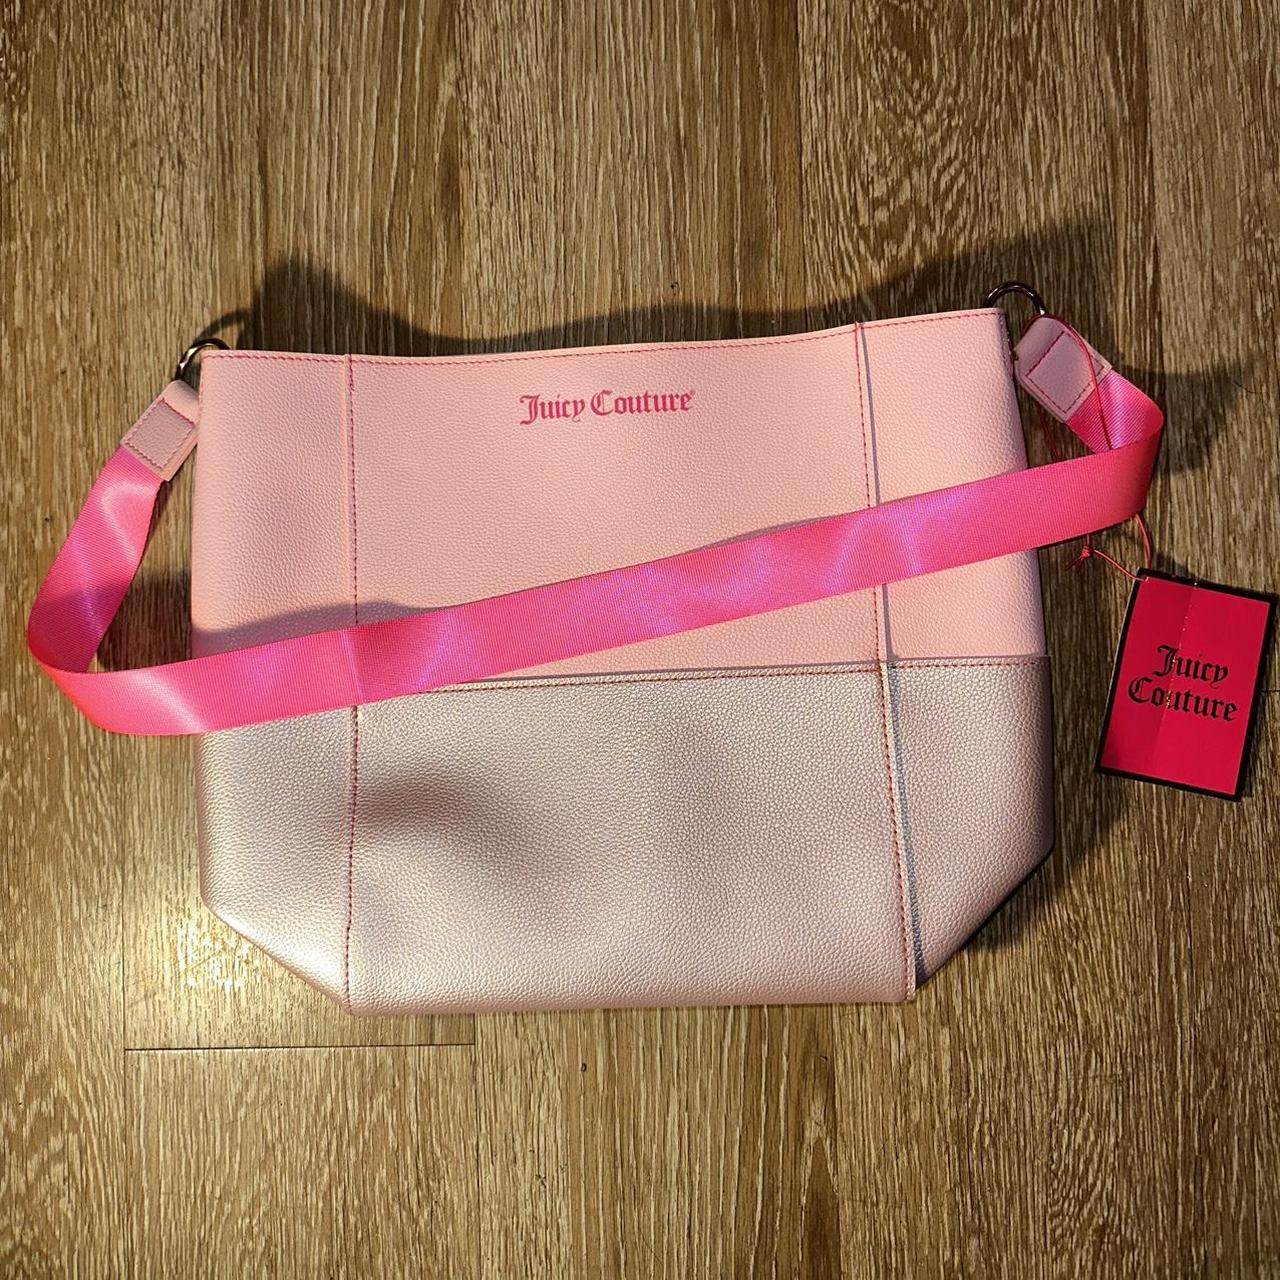 New With Tags - Juicy Couture Large ROSE GOLD Logo - Depop